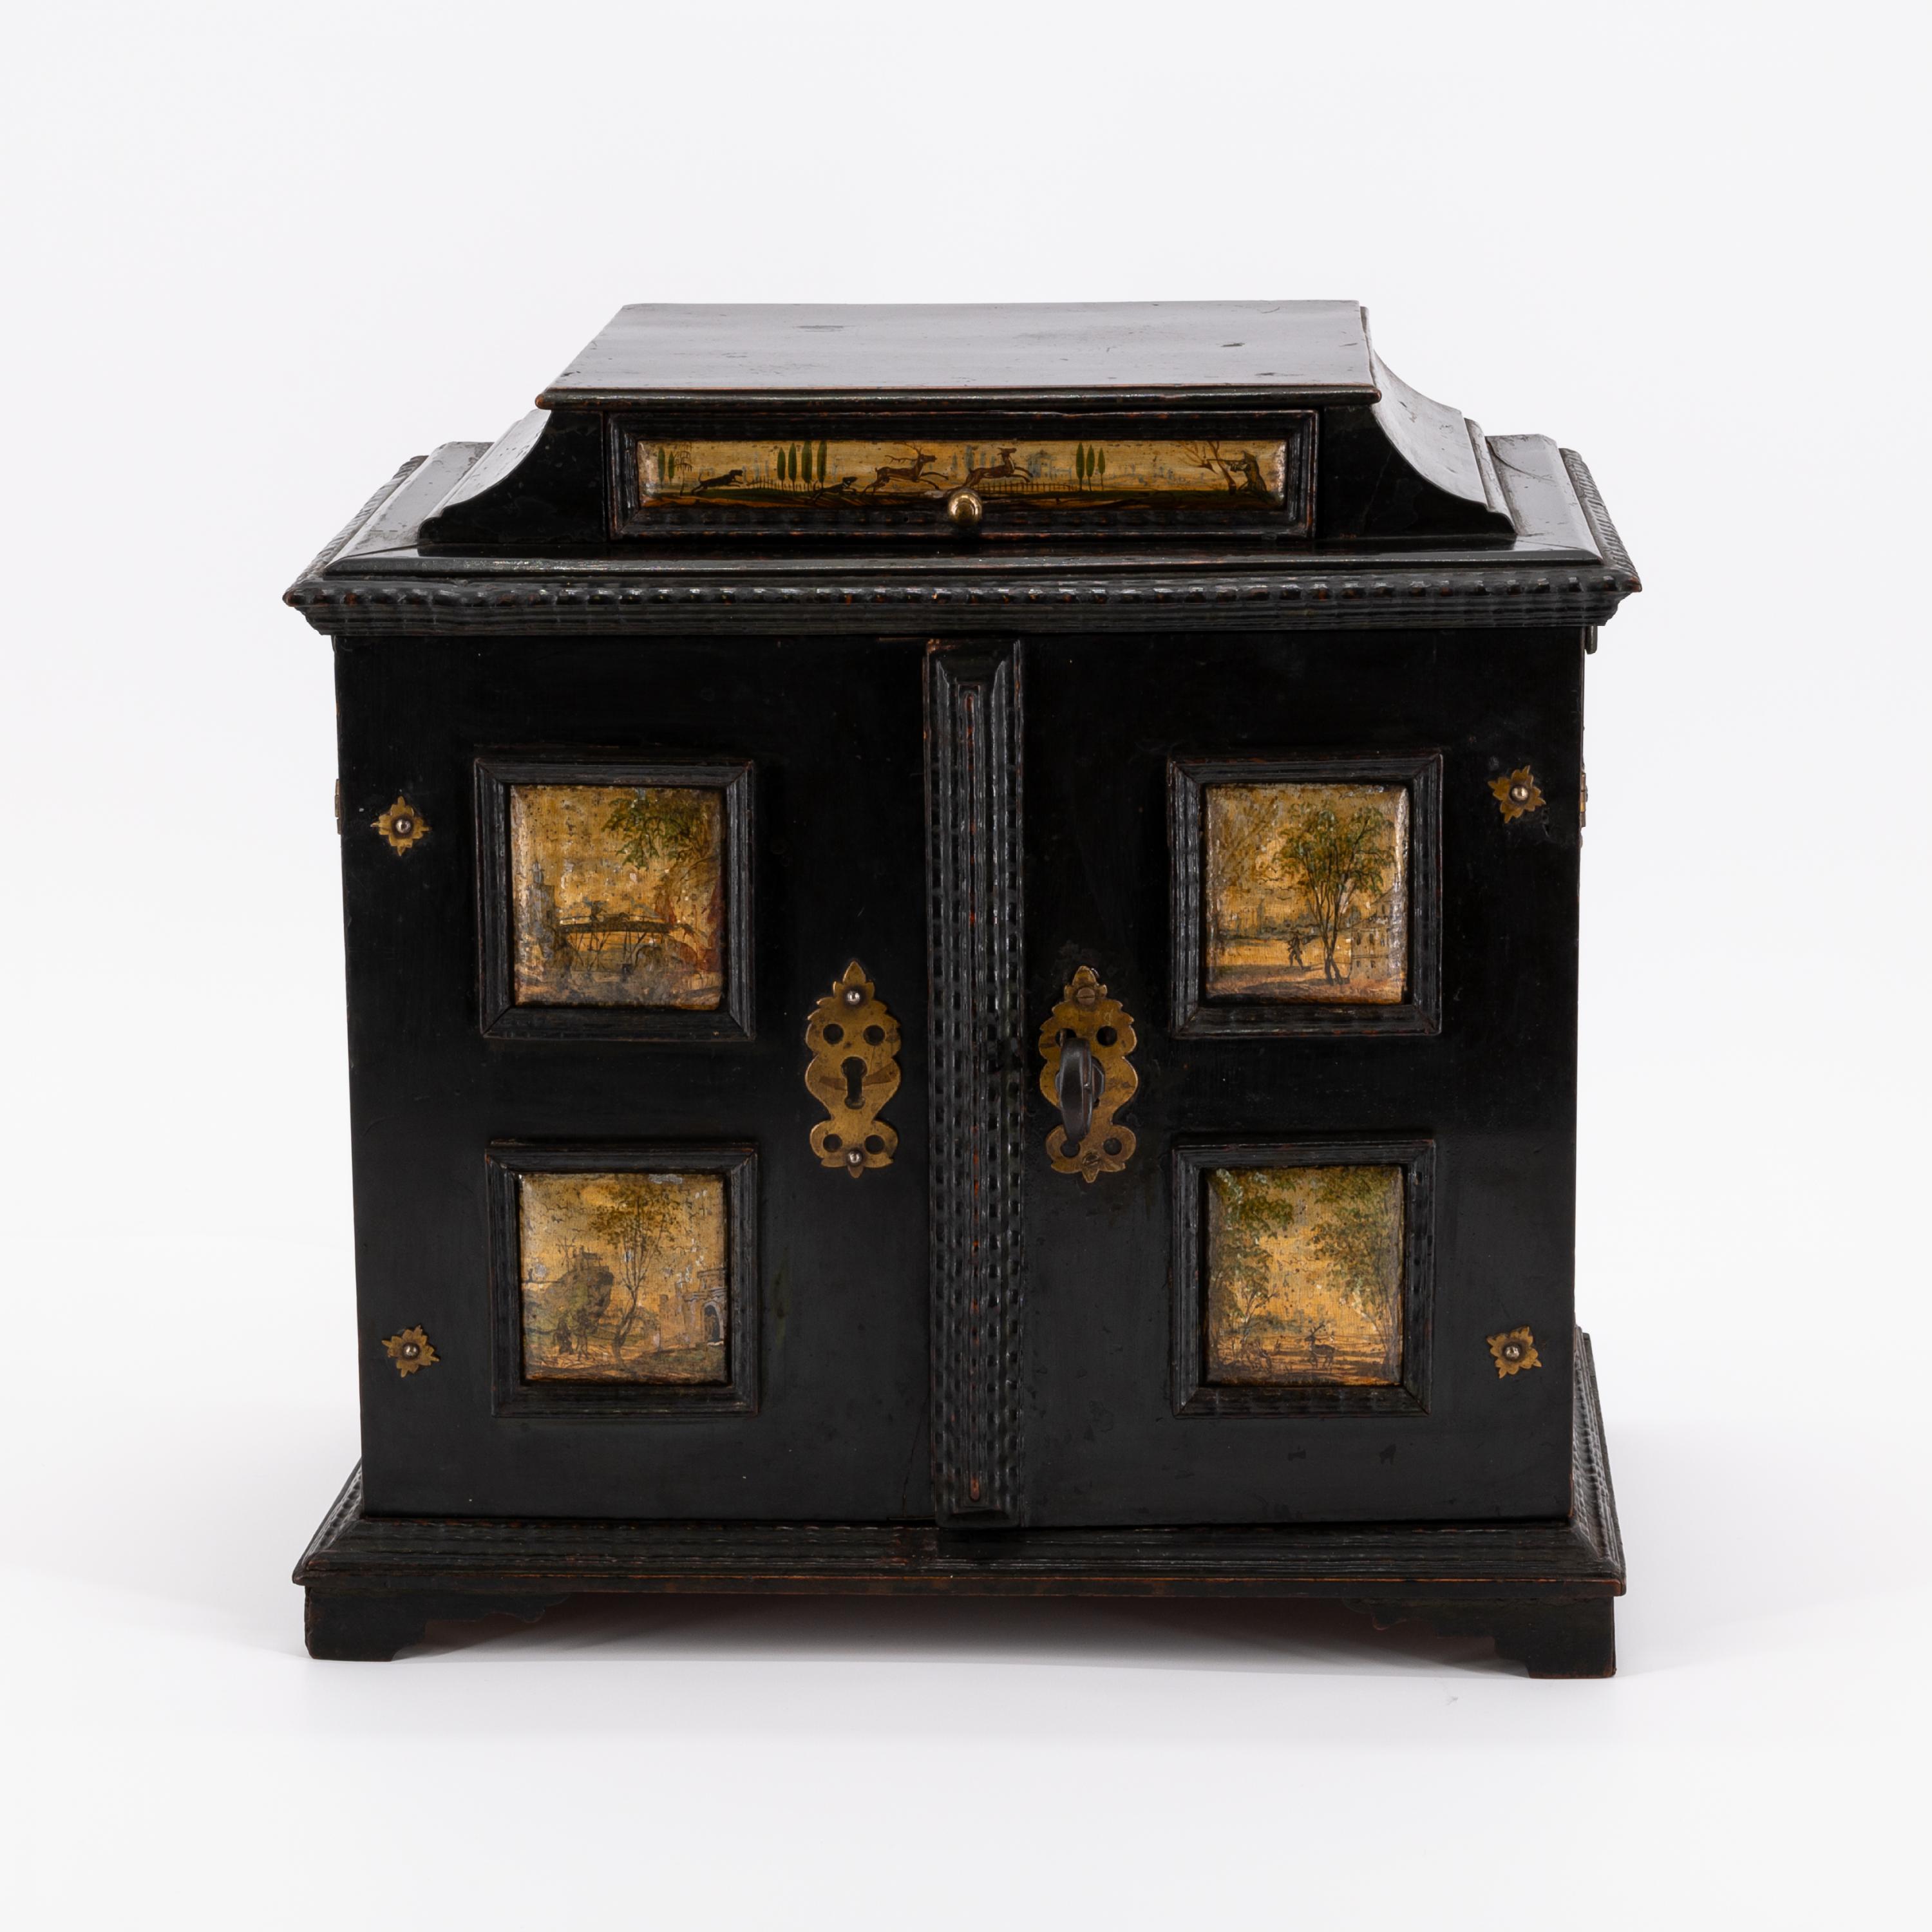 SOFTWOOD CABINET ON STAND WITH LANDSCAPES AND HUNTING SCENES - Image 3 of 7